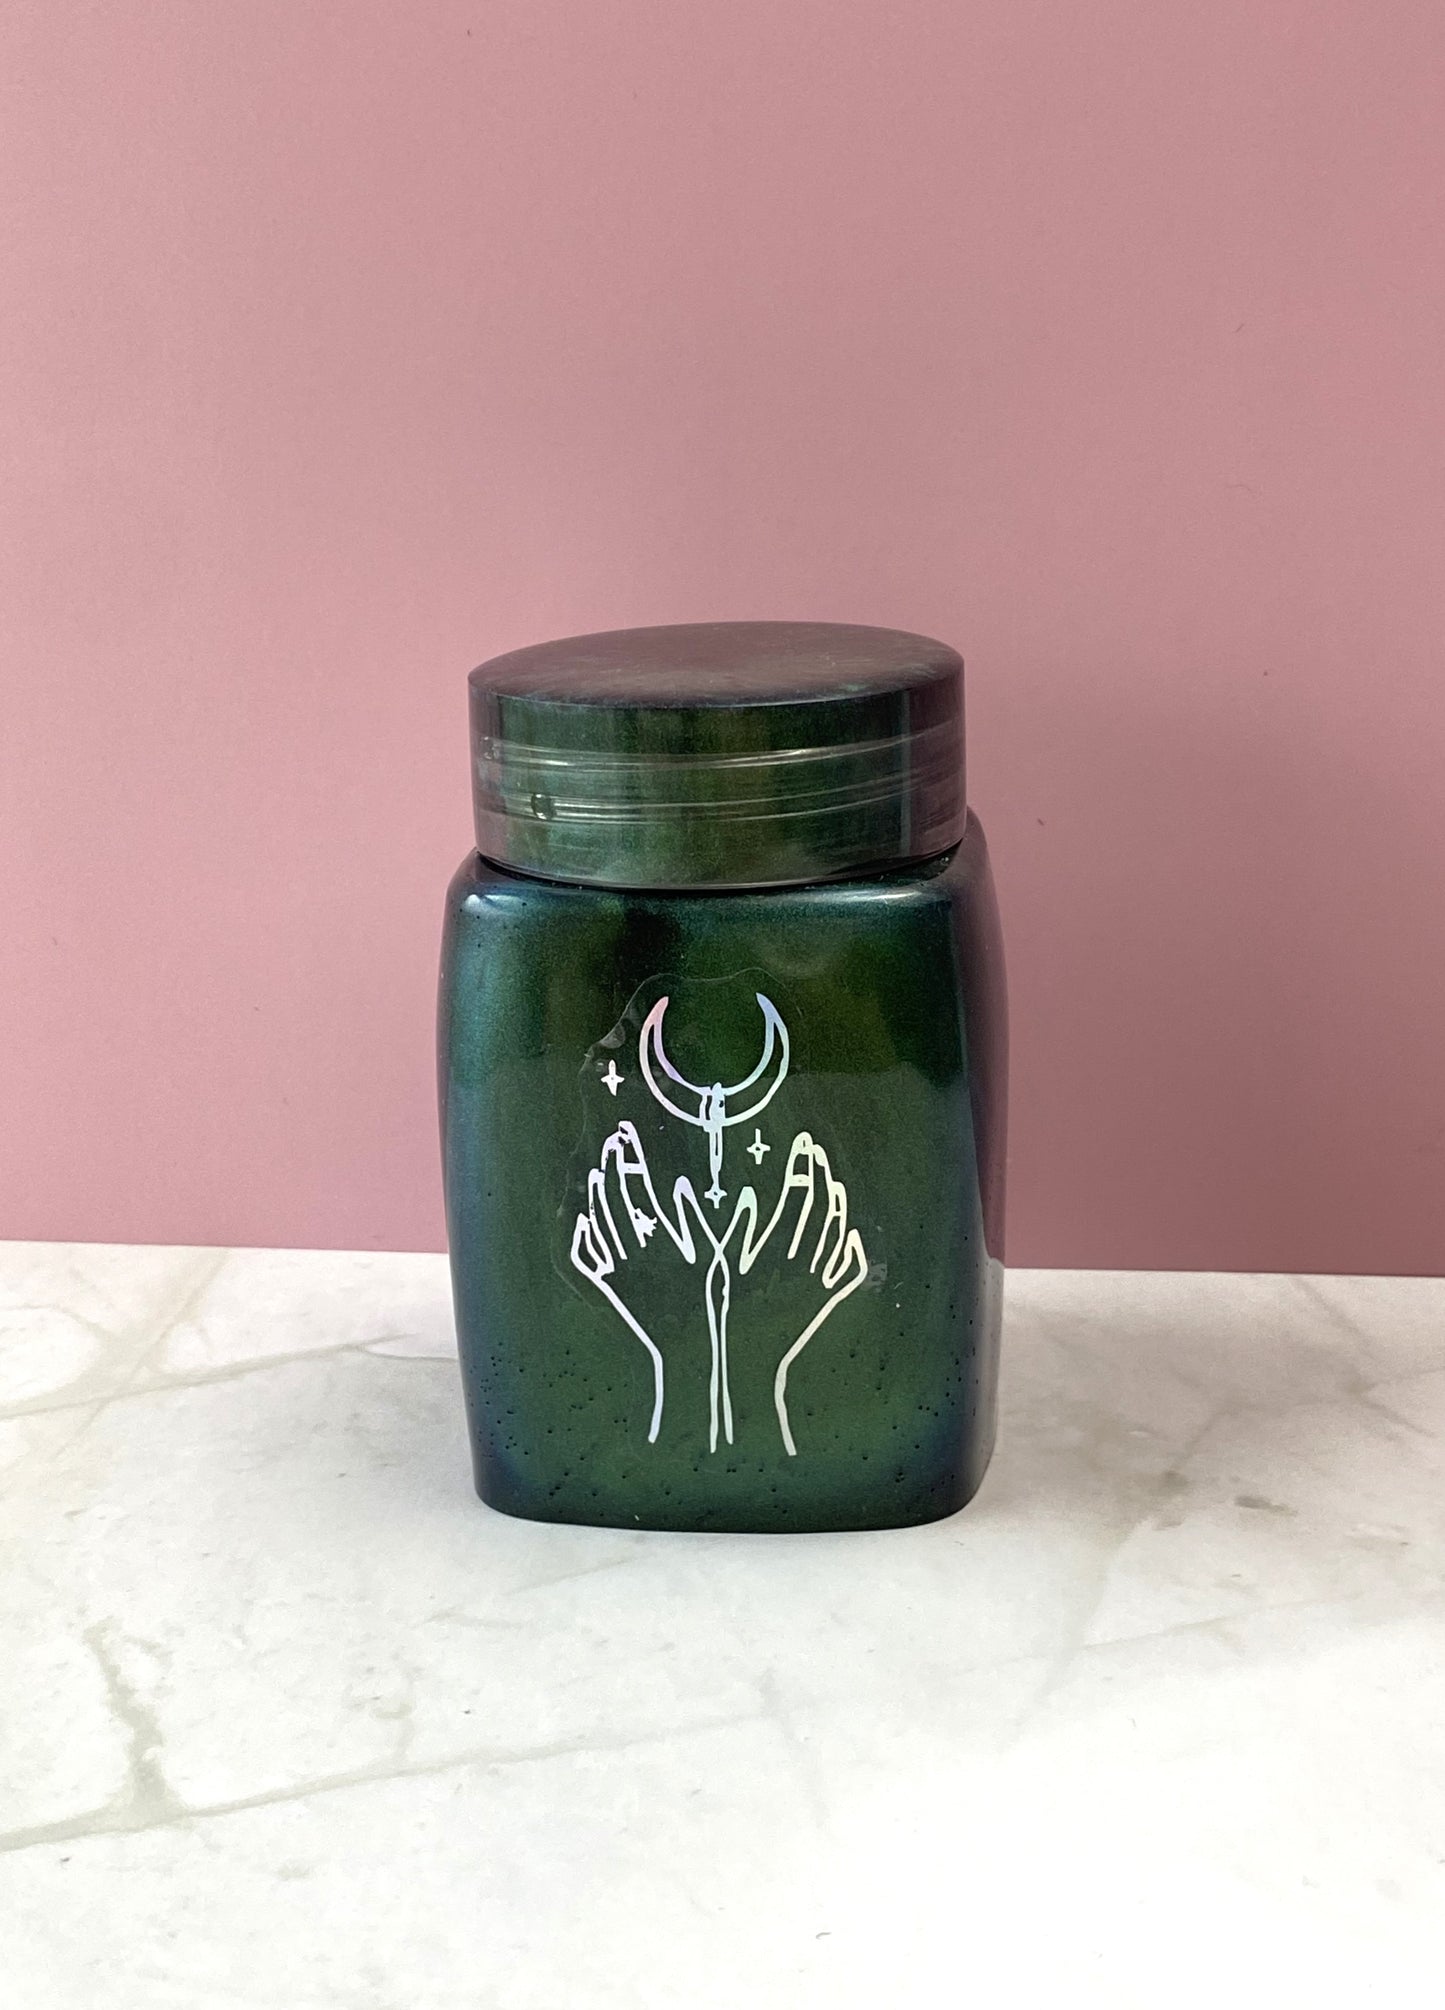 Green Pearl Small Square Jar with Hands & Moon Decal | Spell Jar | Stash Jar | Handmade Home Decor